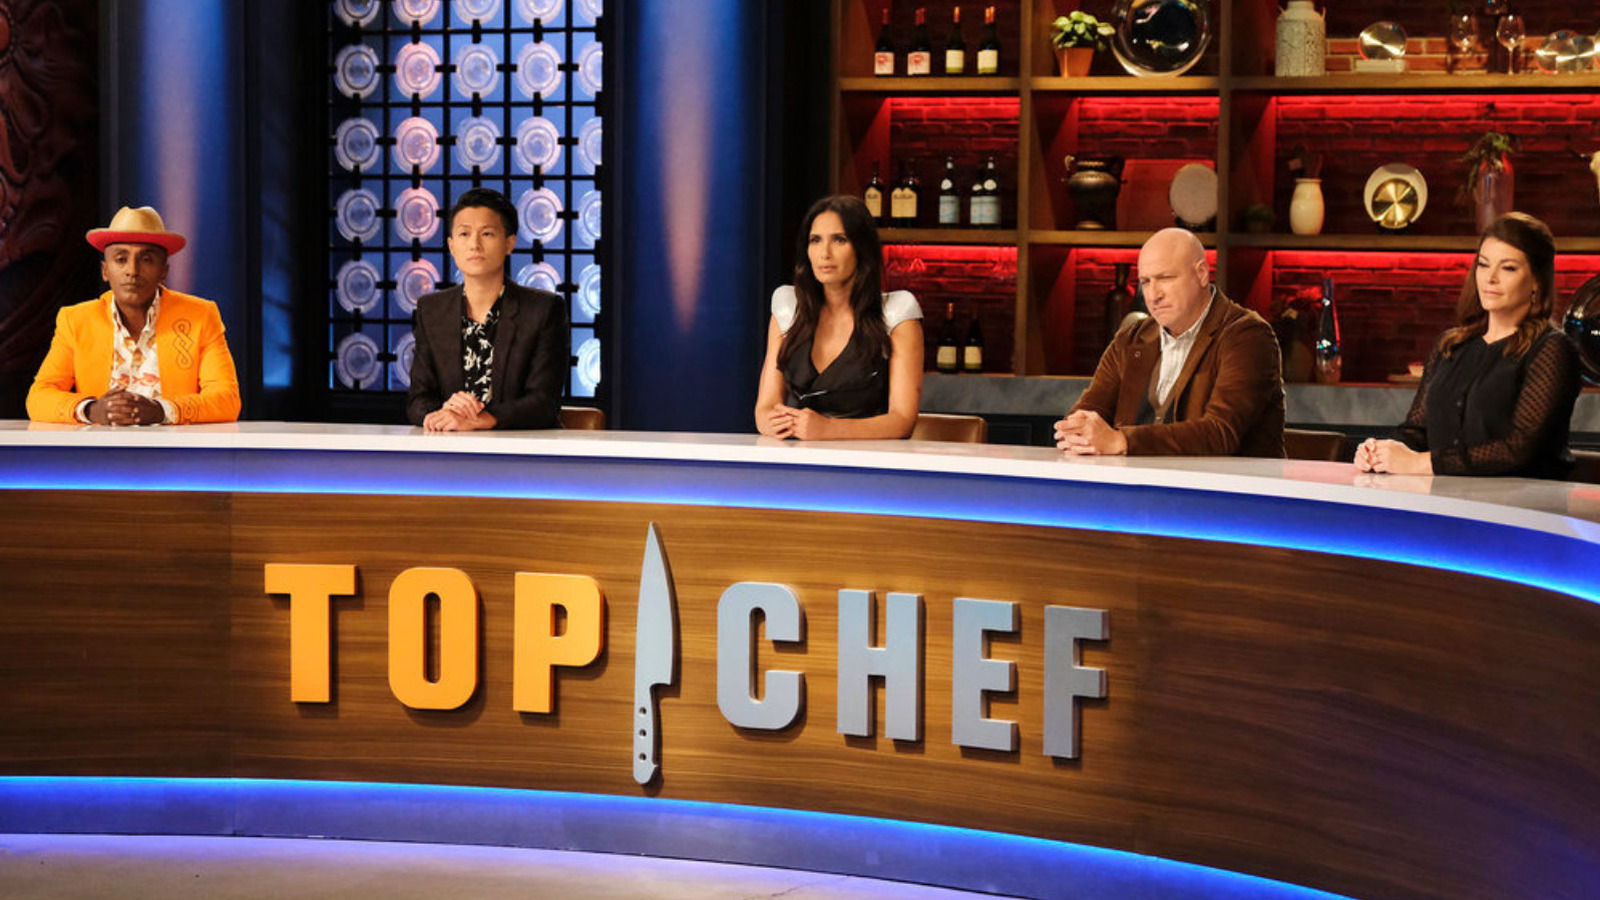 Why Reddit Has Concern With Top Chef's Last Chance Kitchen